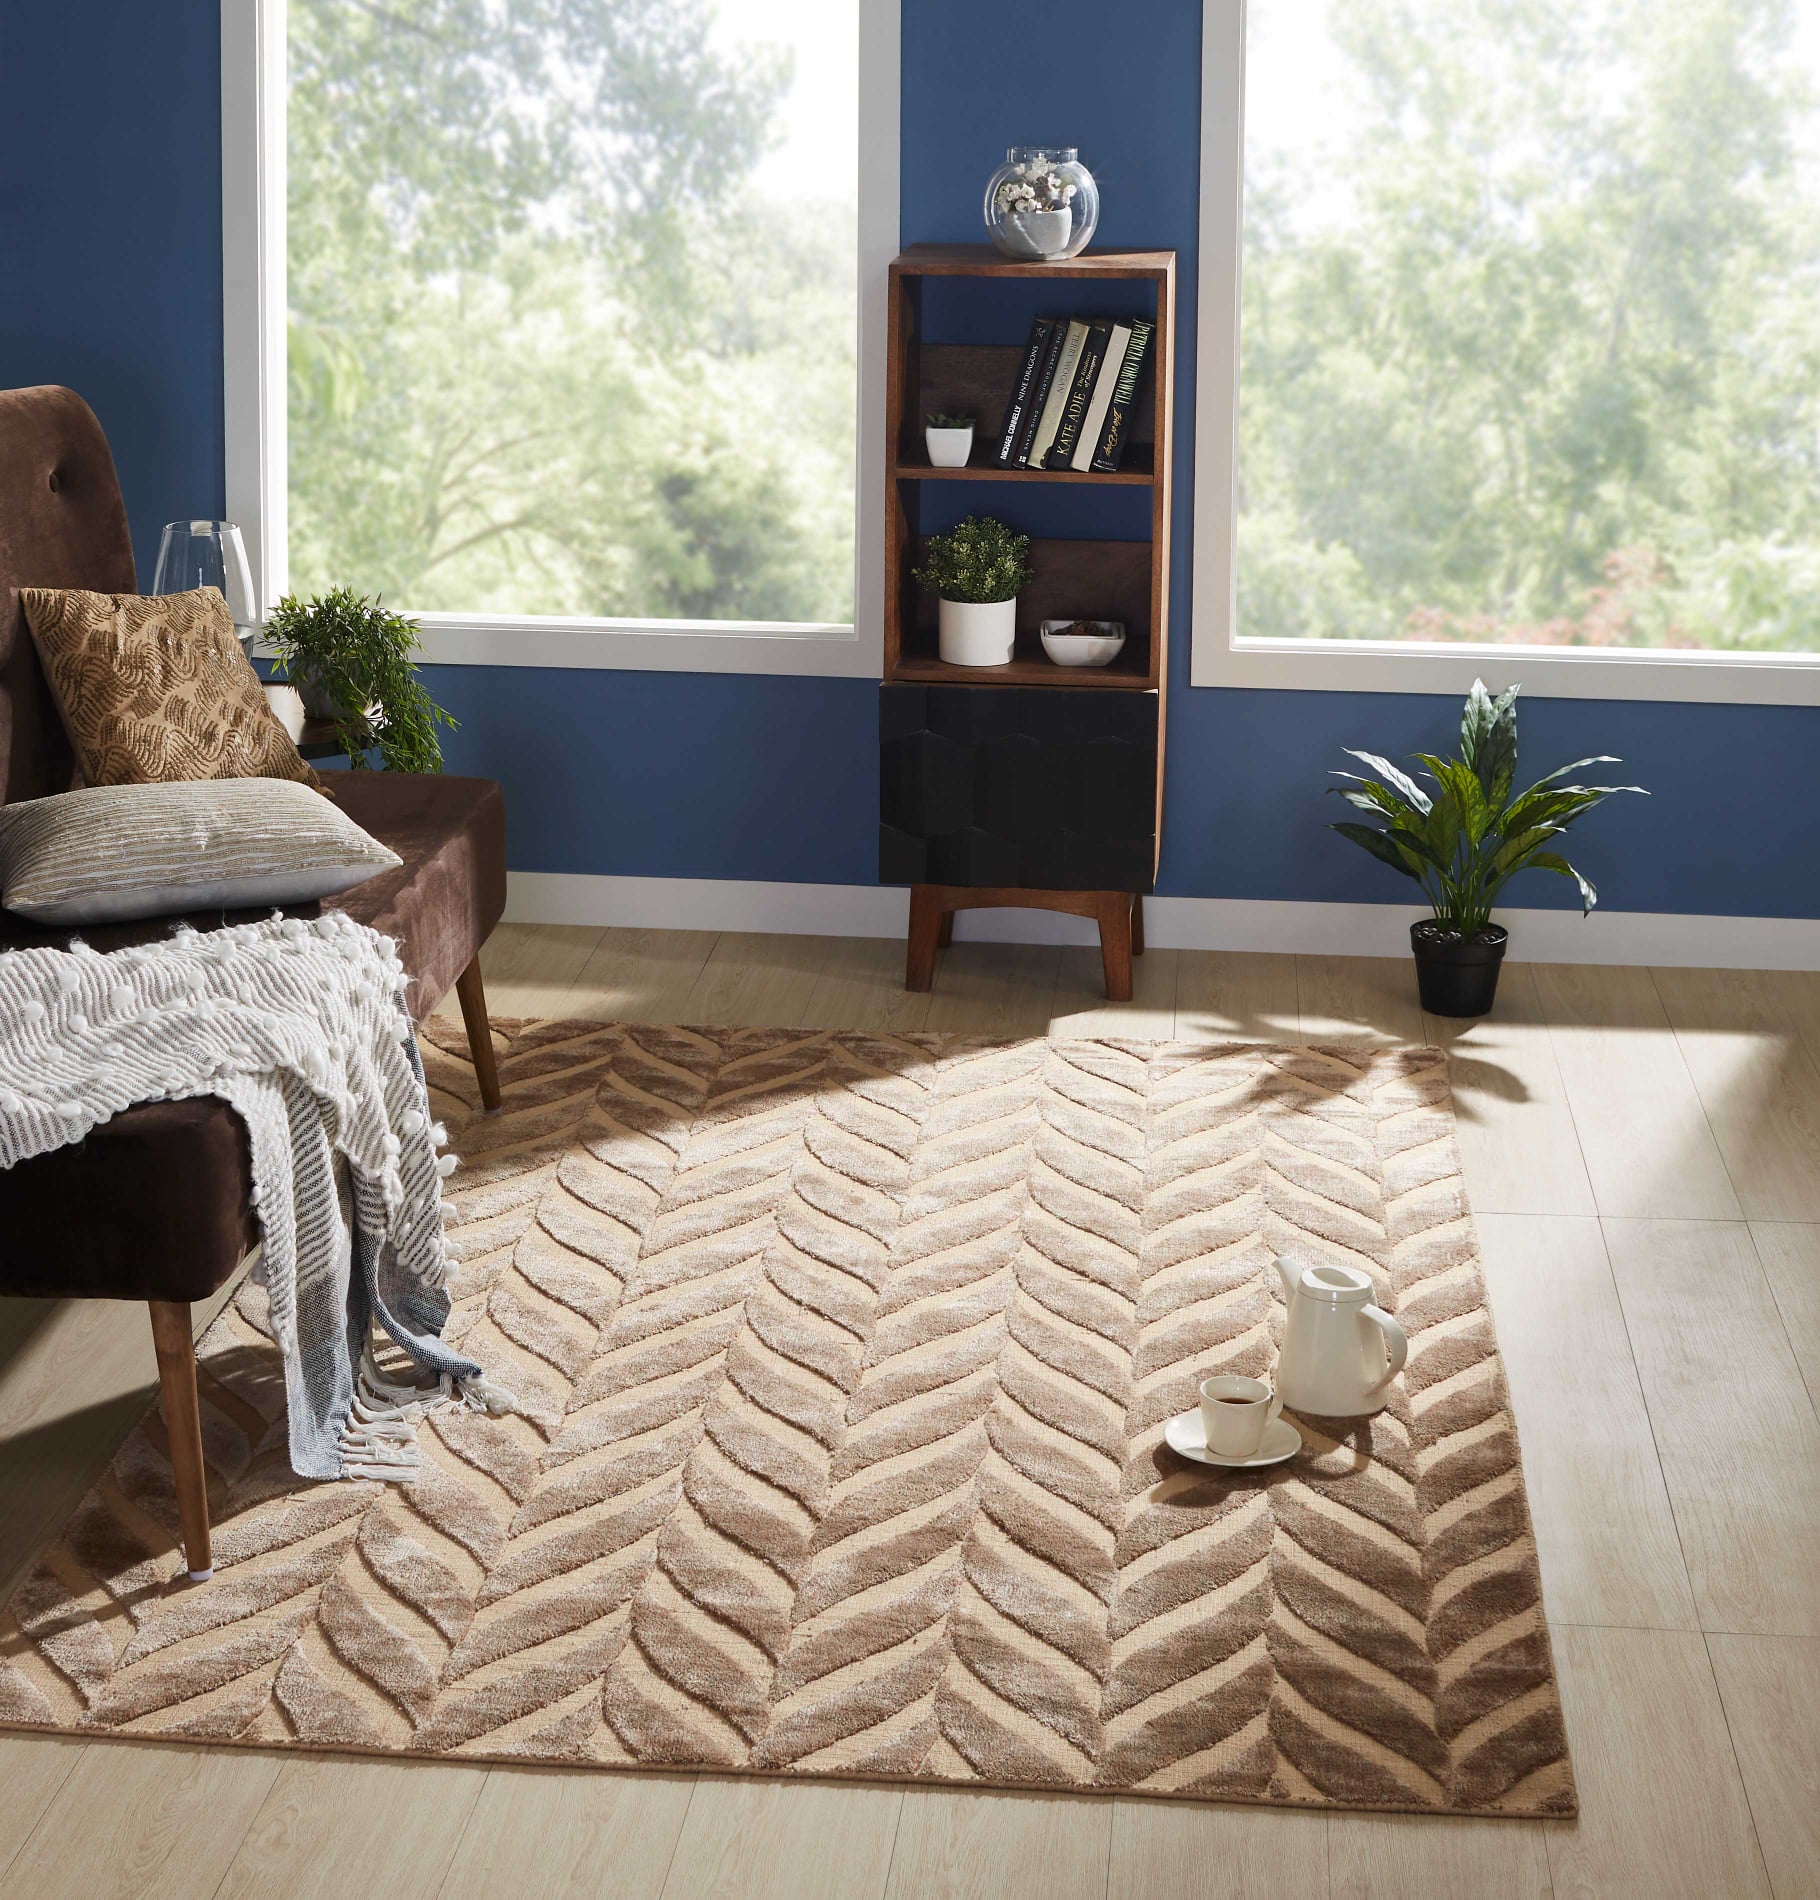 The Leading Manufacturers of Carpets & Rugs - Marwar Carpets